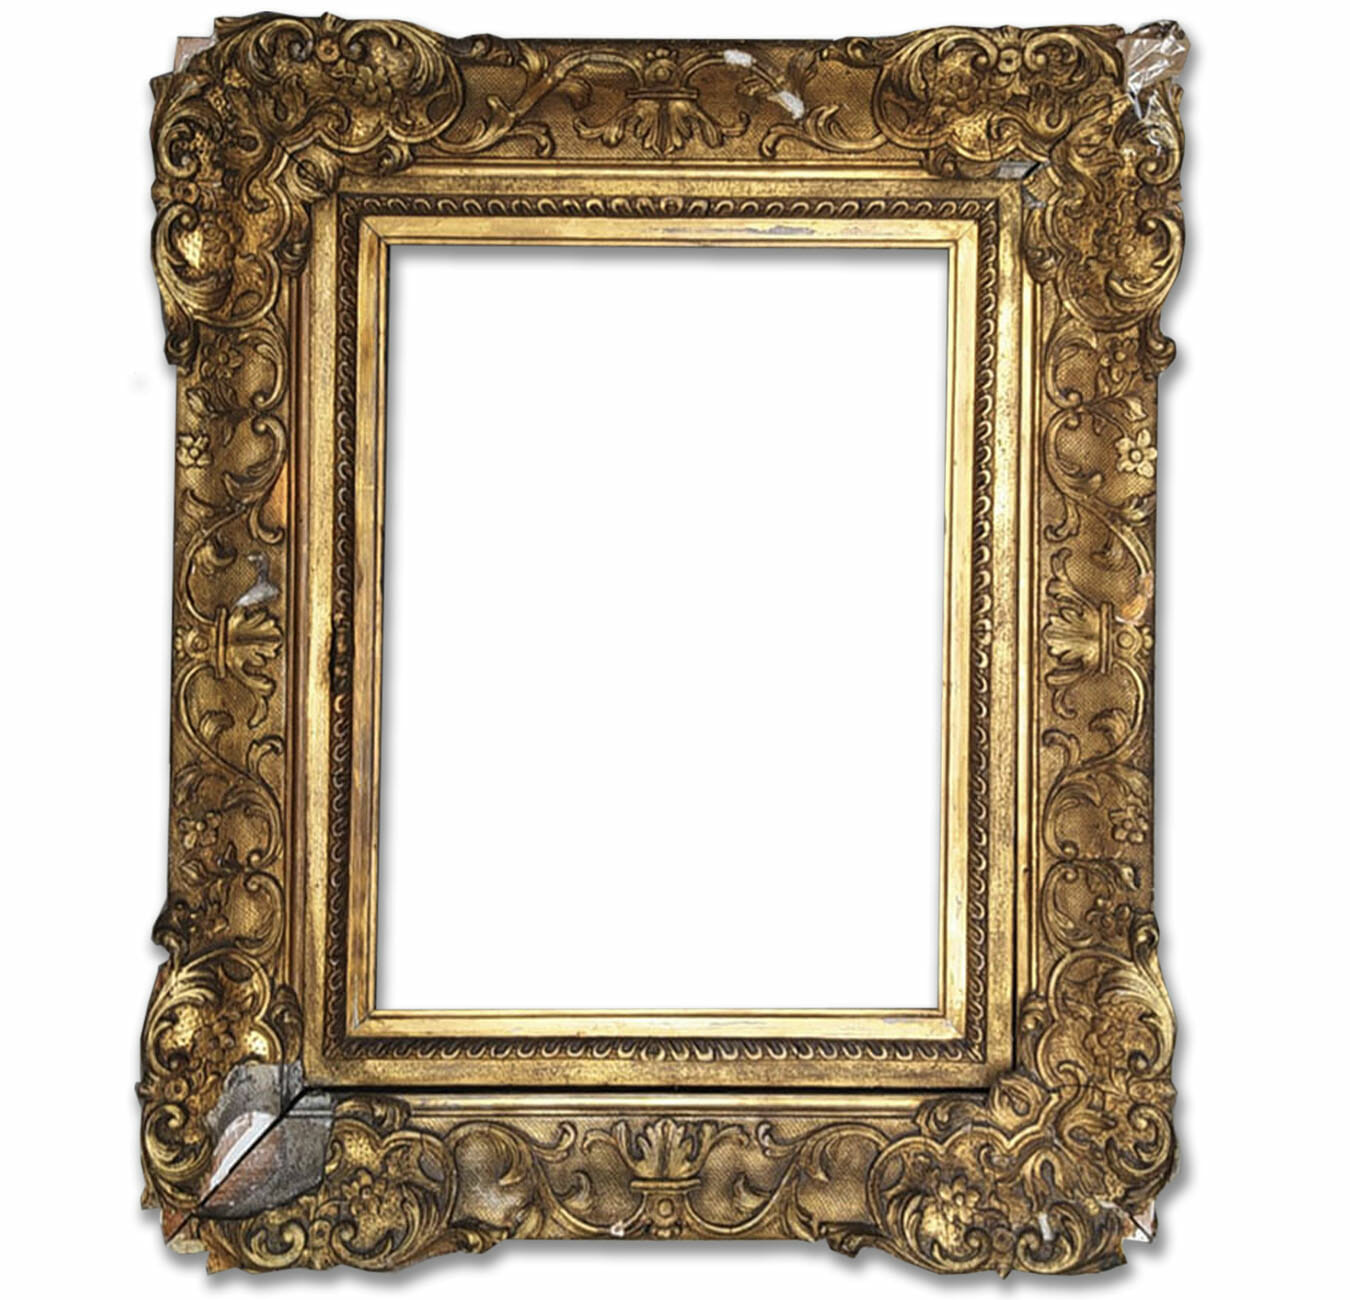 Frame example before